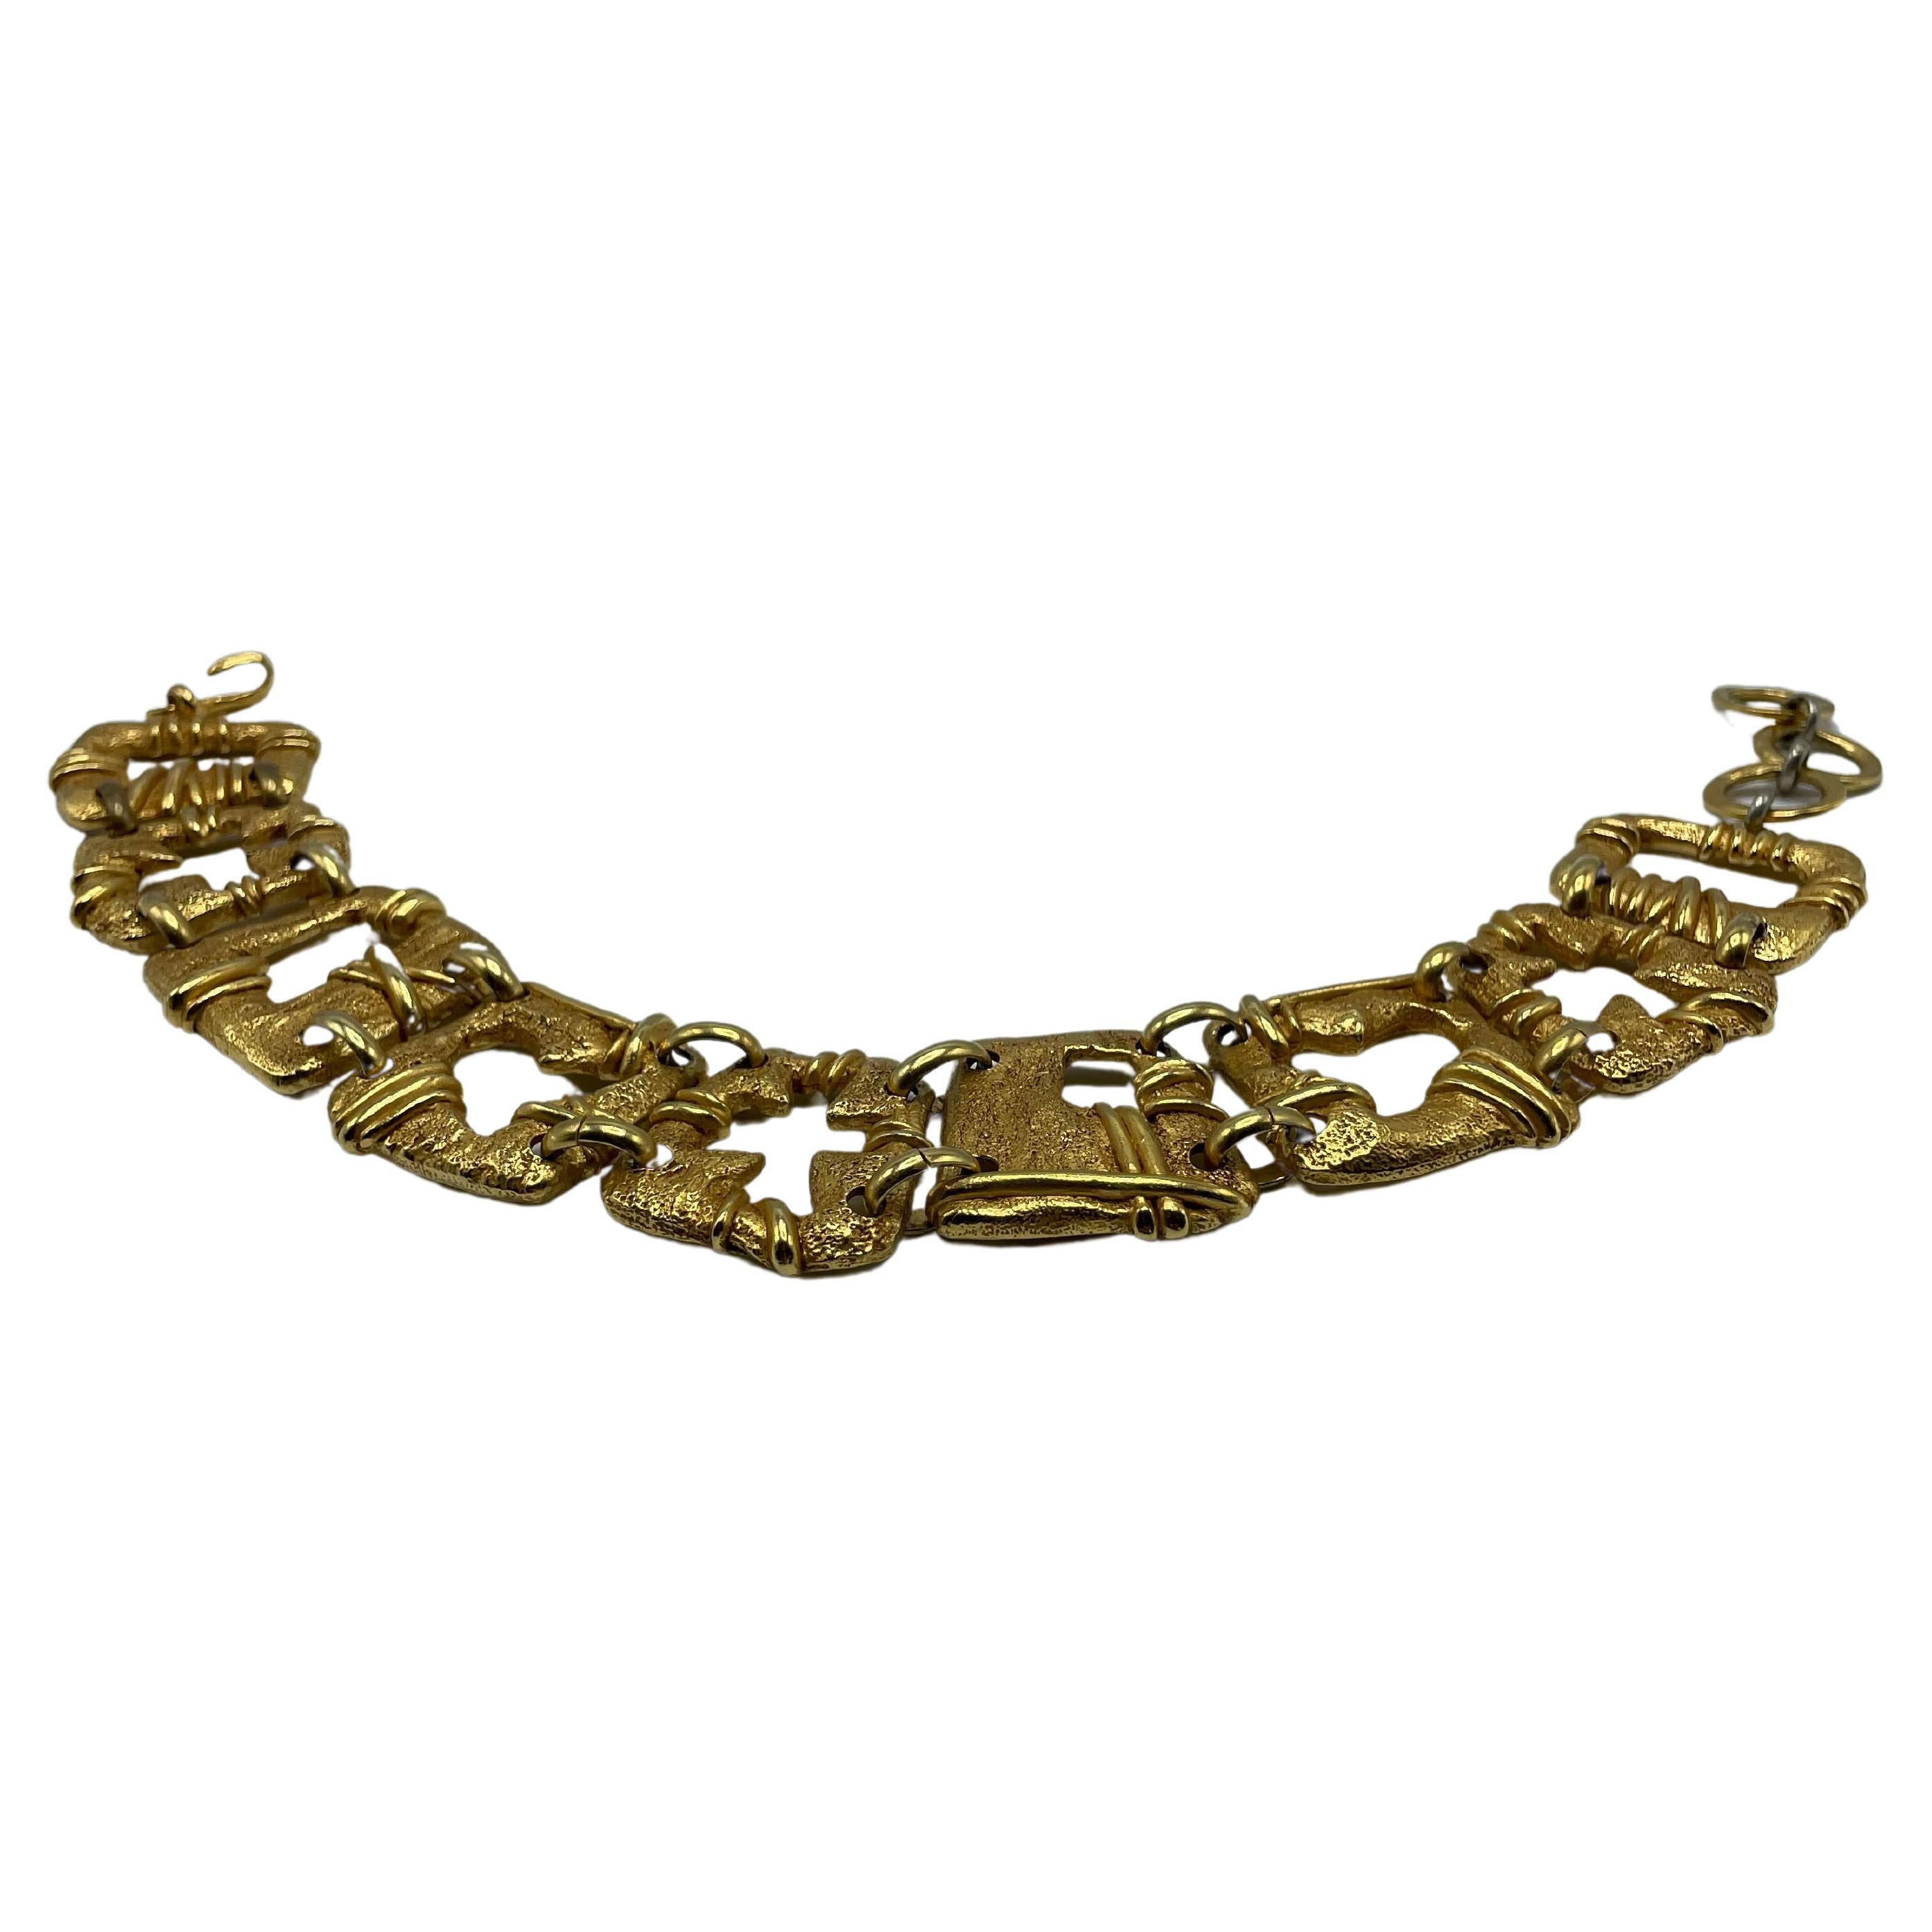 Christian Lacroix Vintage Gold Toned Choker Necklace. This necklace consists of nine squares with a hole in the center, a cross, a heart, and squares of varying sizes. 3 link for multiple sizes. 
Signature of Christian Lacroix Made in France.